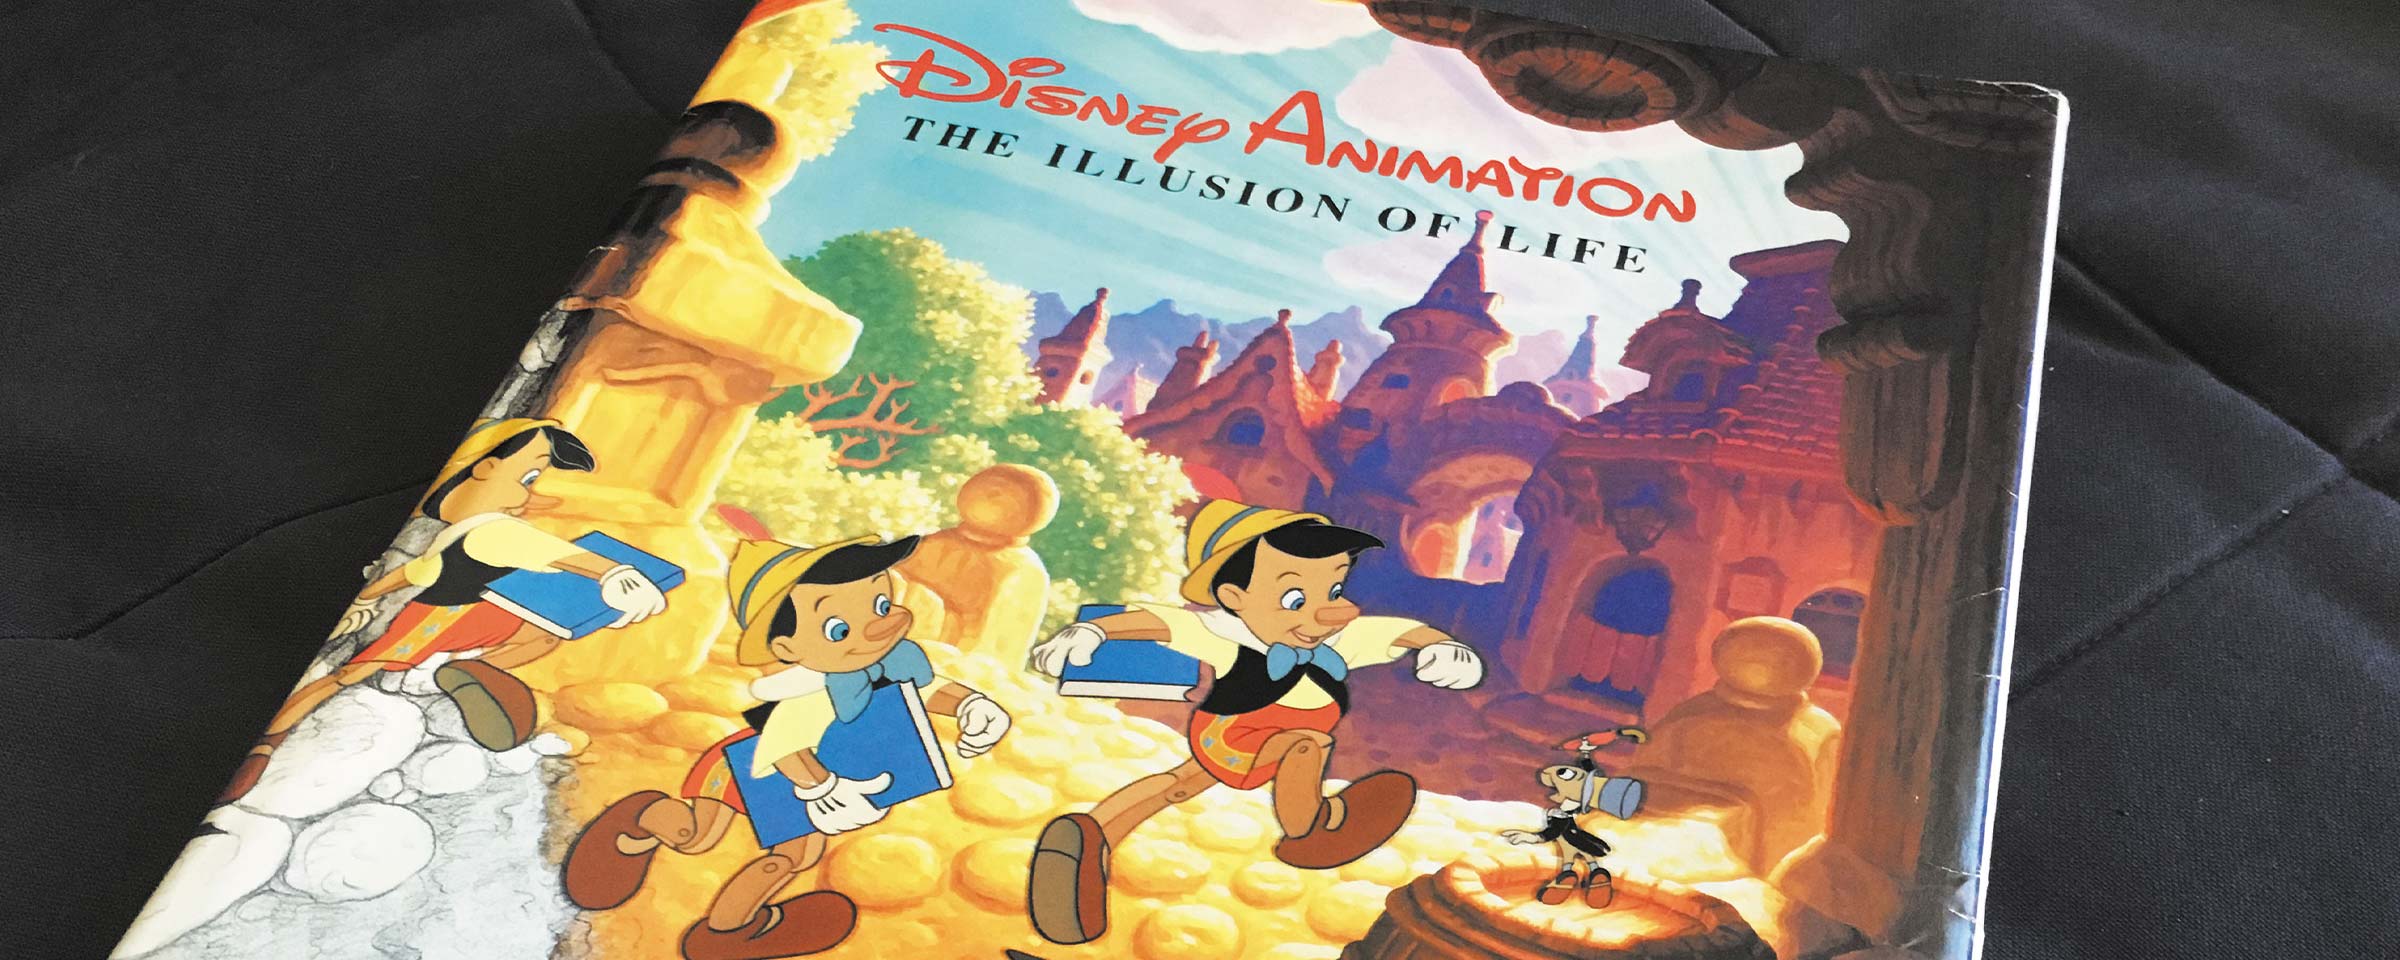 Book cover of The Illusion of Life by Disney